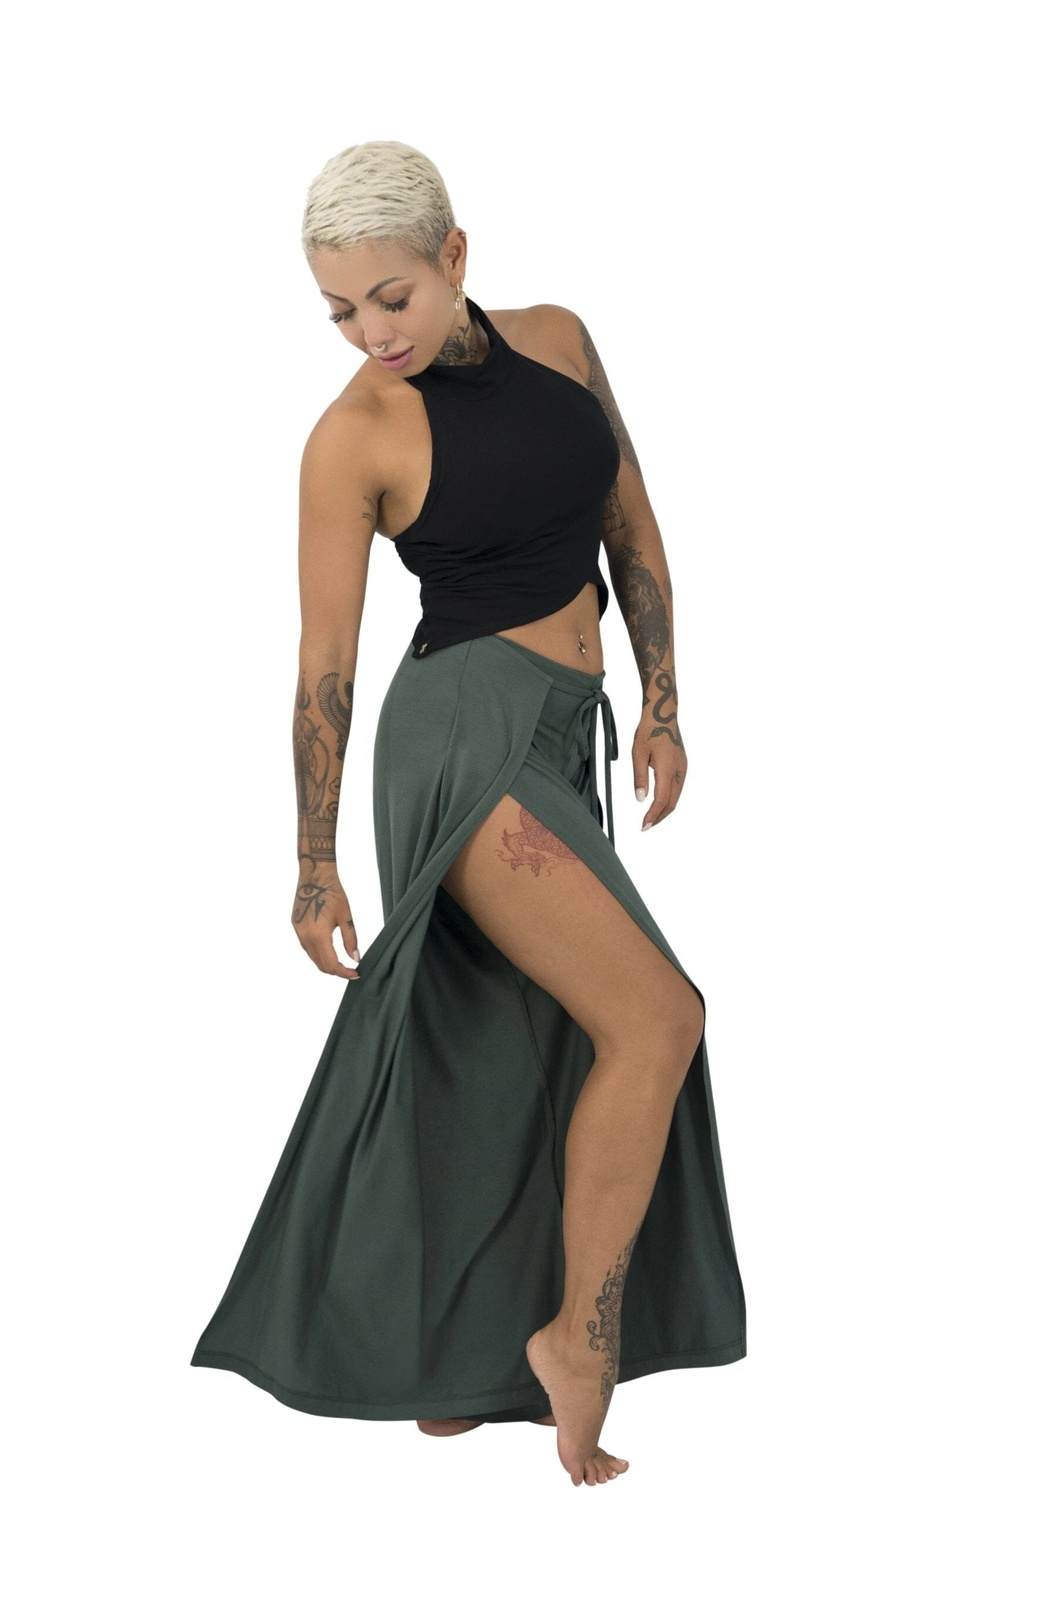 The Paris Palazzo Pants are flowy wide leg pants perfect for resort wear from Ekoluxe sustainable fashion brand.